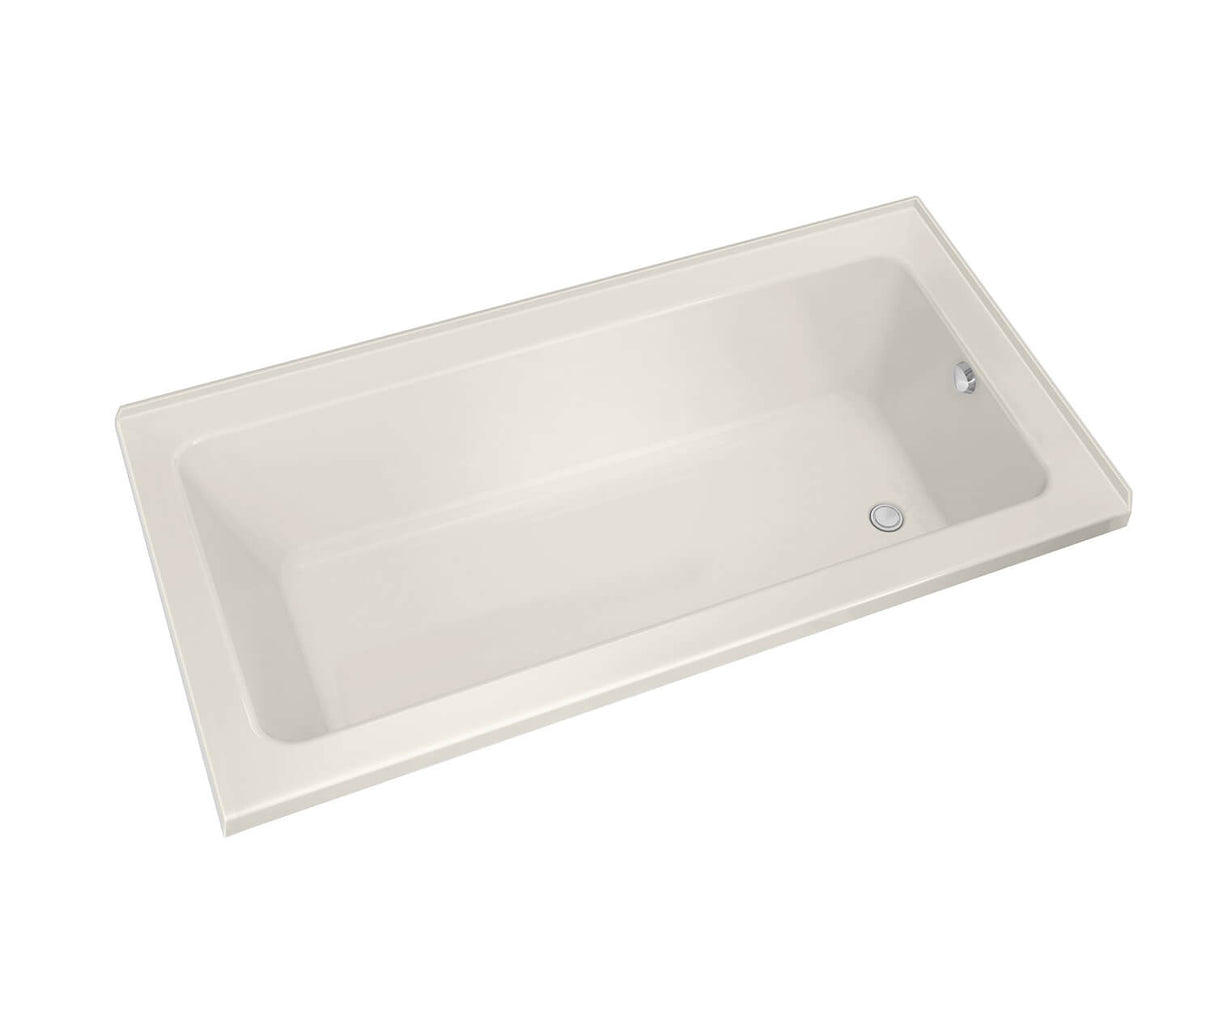 MAAX 106200-R-097-007 Pose 6030 IF Acrylic Corner Right Right-Hand Drain Combined Whirlpool & Aeroeffect Bathtub in Biscuit